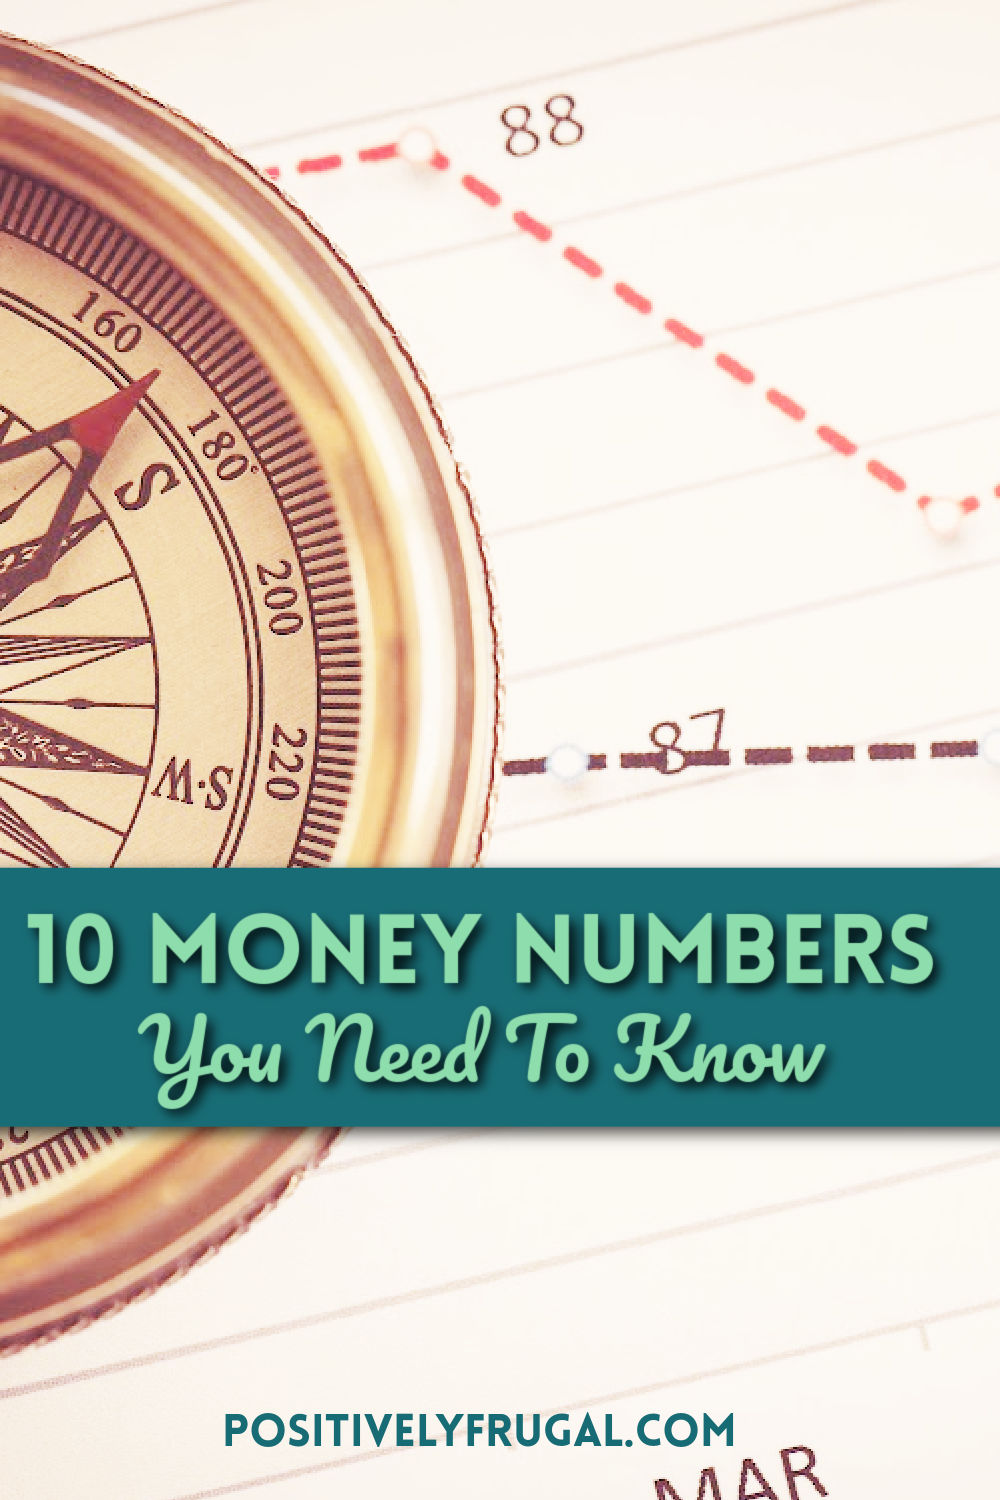 Money Numbers You Need to Know by PositivelyFrugal.com